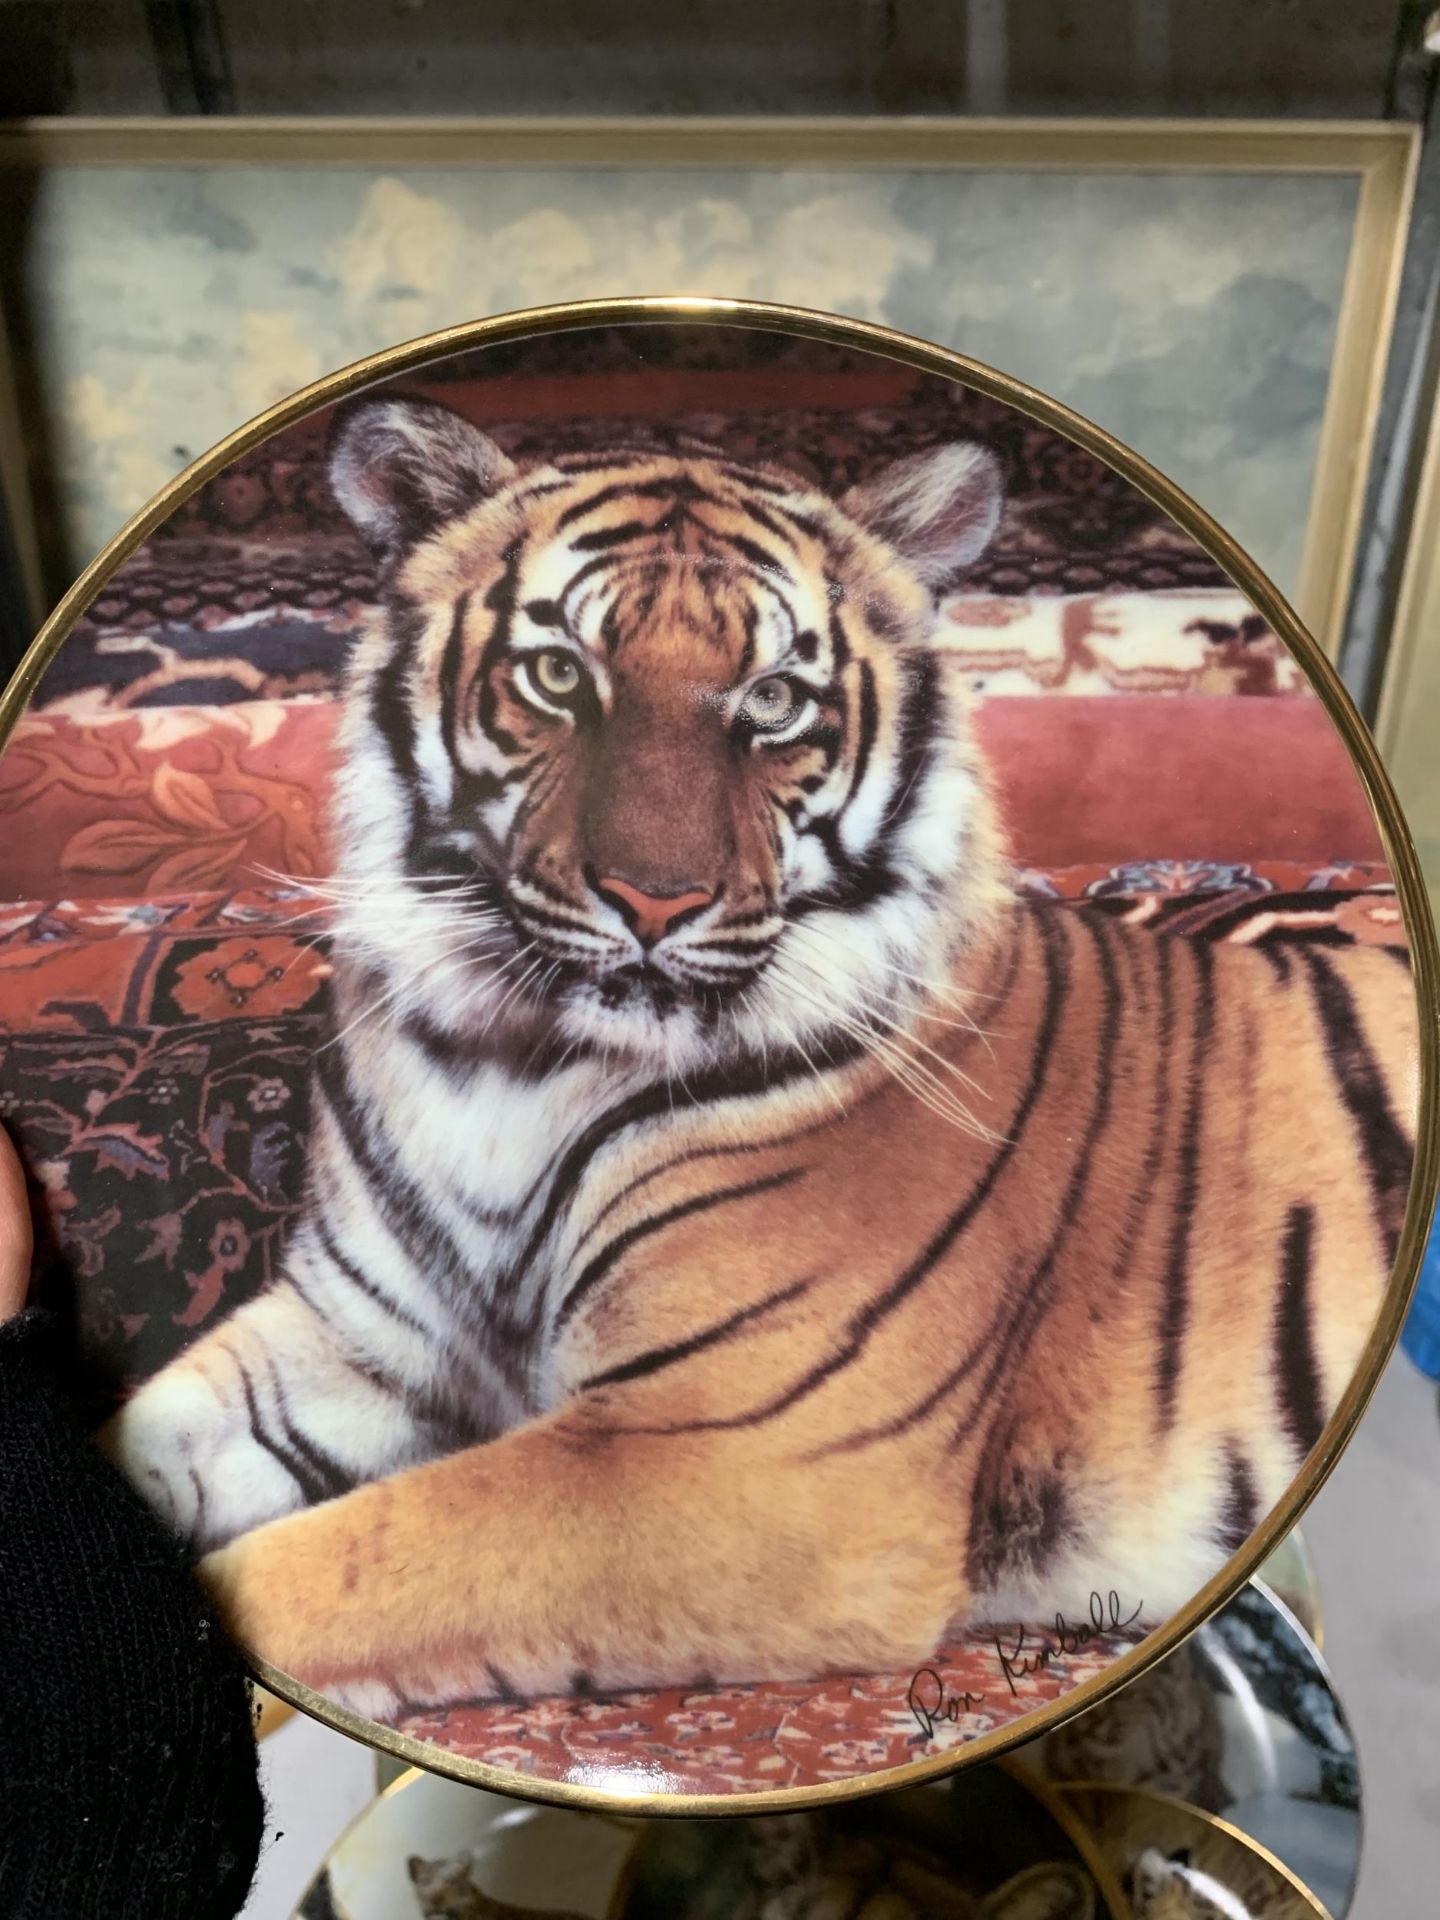 A LARGE COLLECTION OF CABINET/WALL PLATES ALL WITH A BIG CAT THEME - 19 IN TOTAL - Image 2 of 3